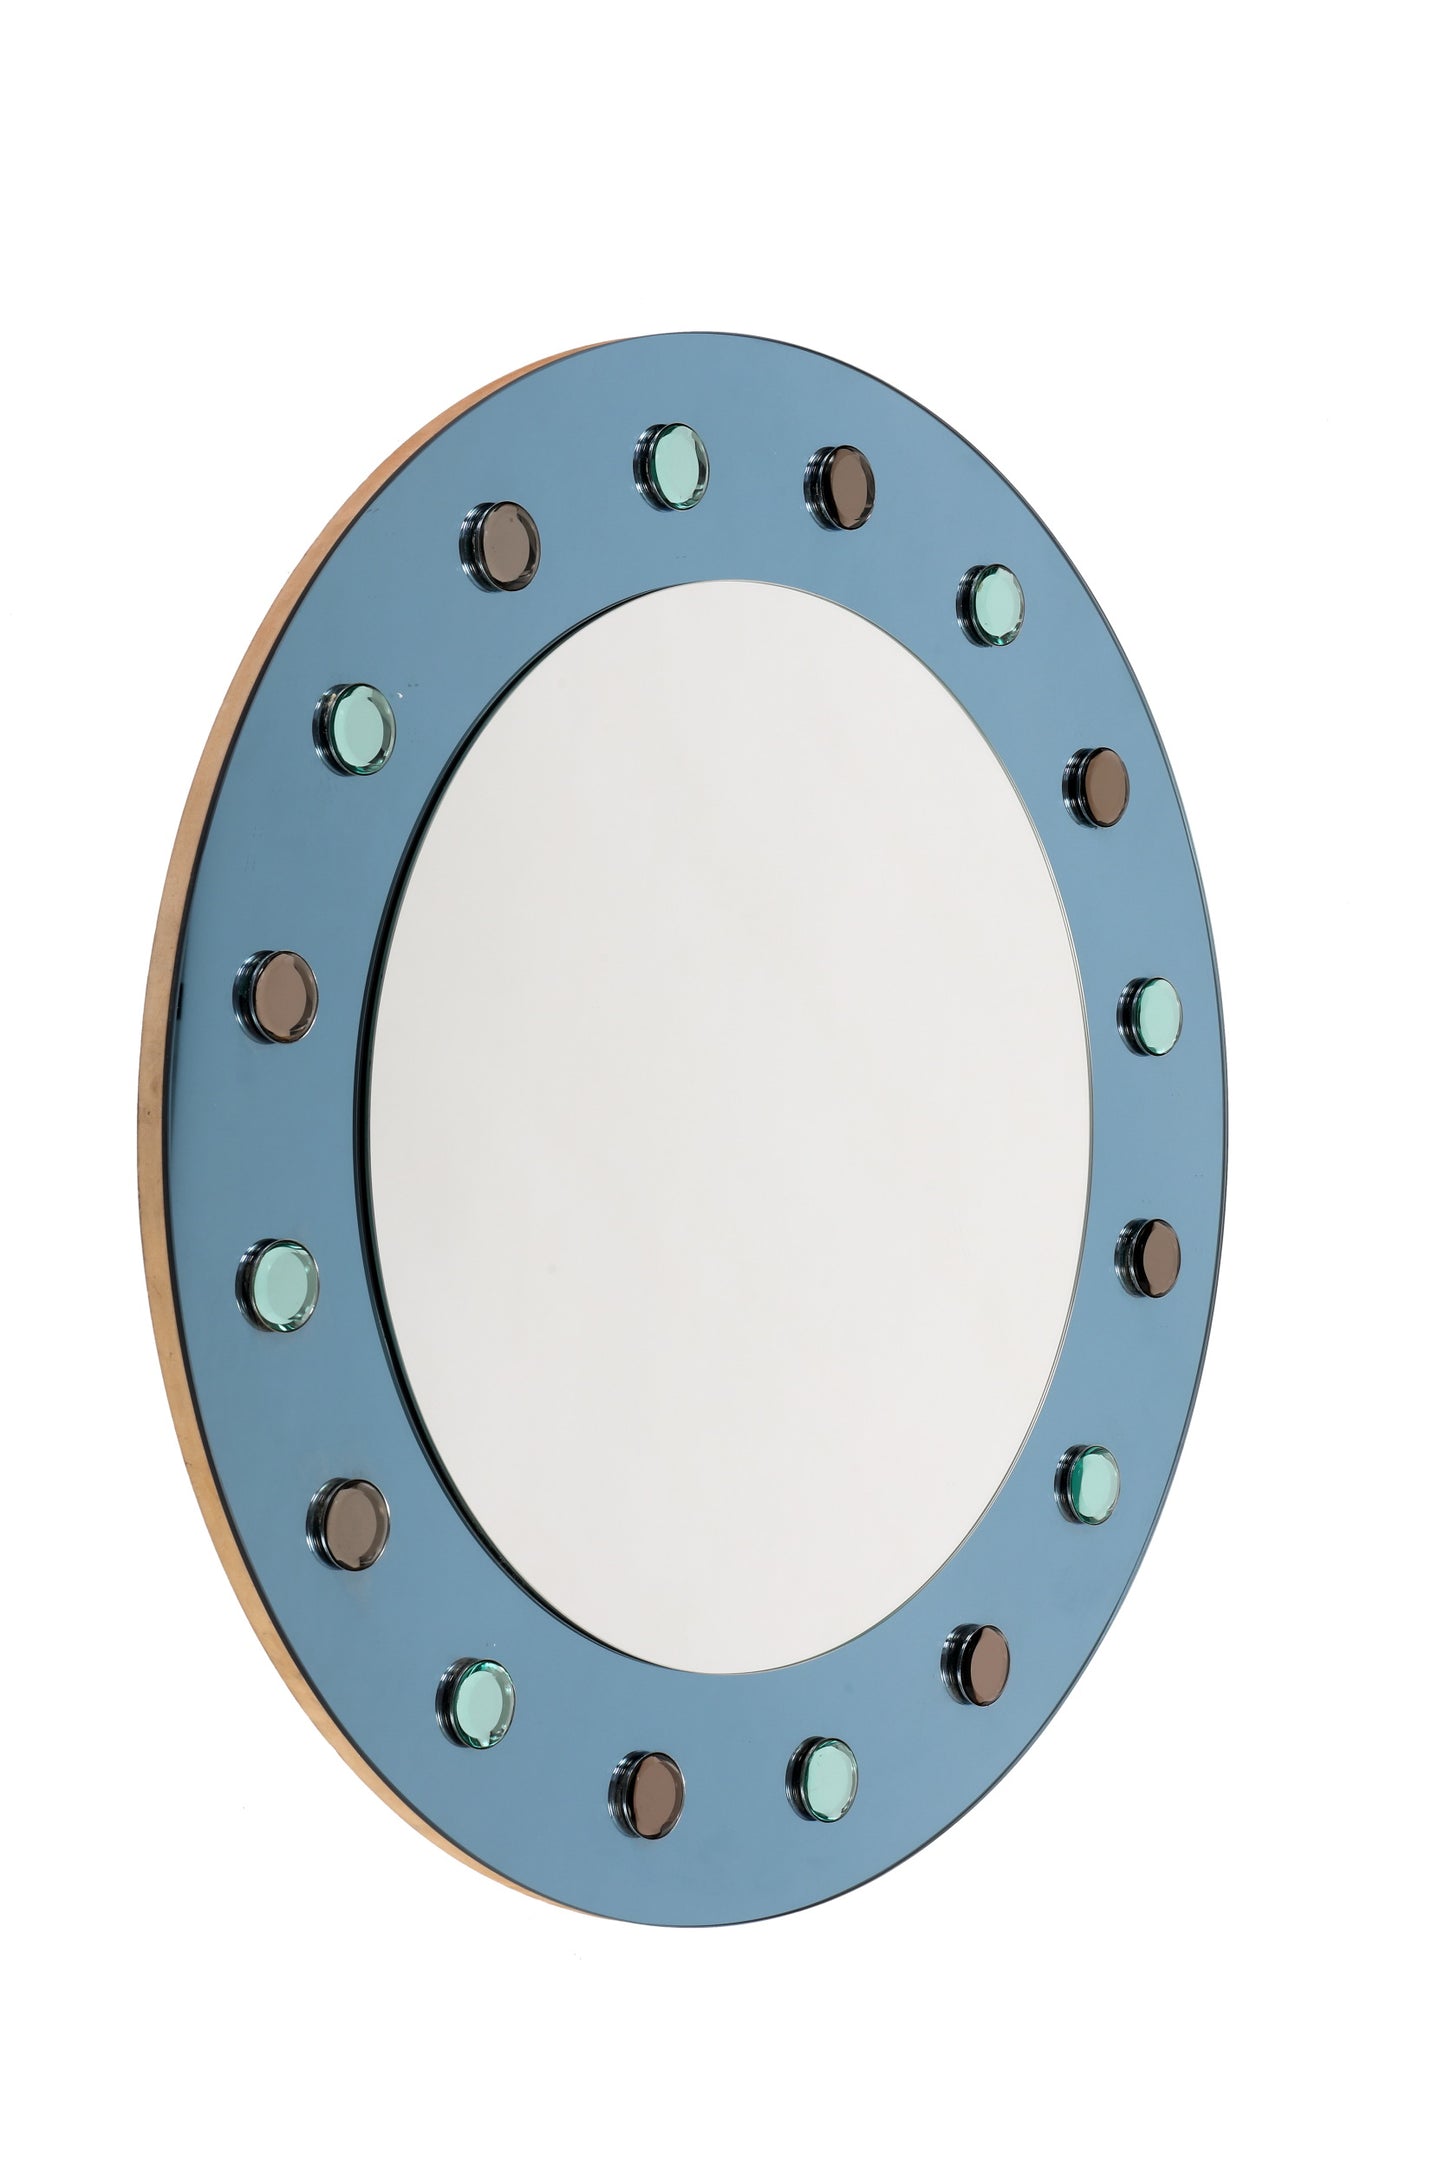 Round mirror from the 70s with mirrored studs